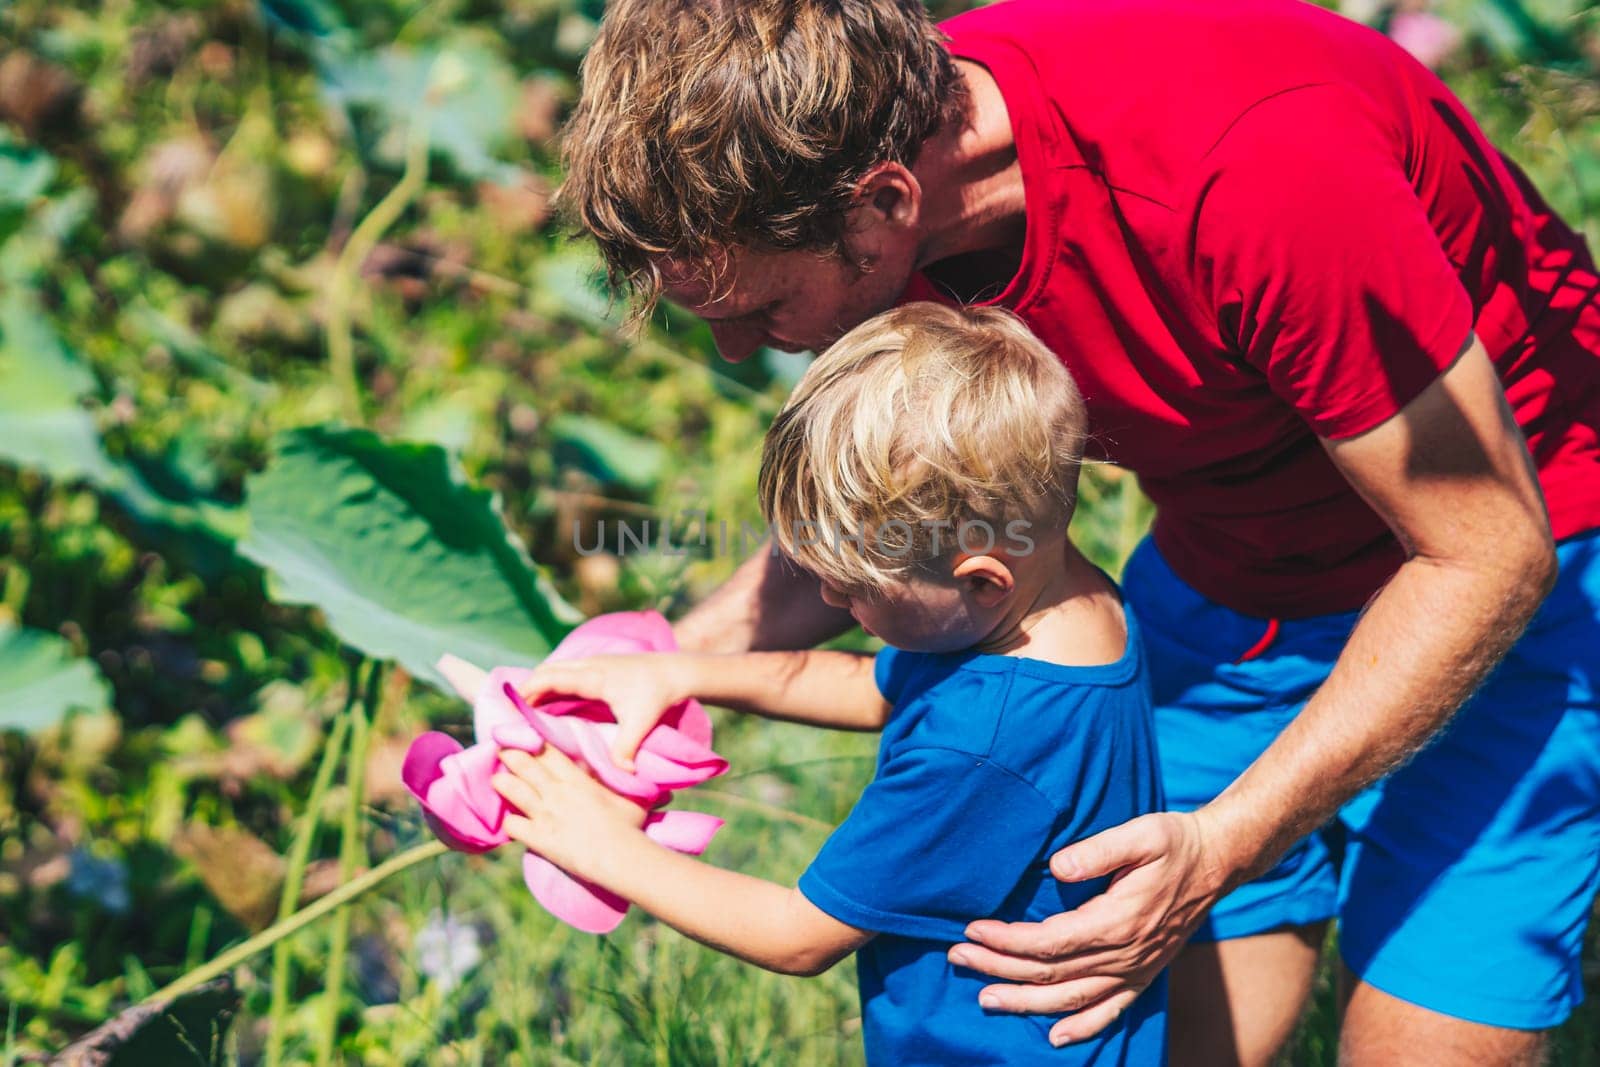 Father son study plants, looking on buds flower bud leaves stamens petals. Natural sciences, family education. Happy childhood parenthood harmony.